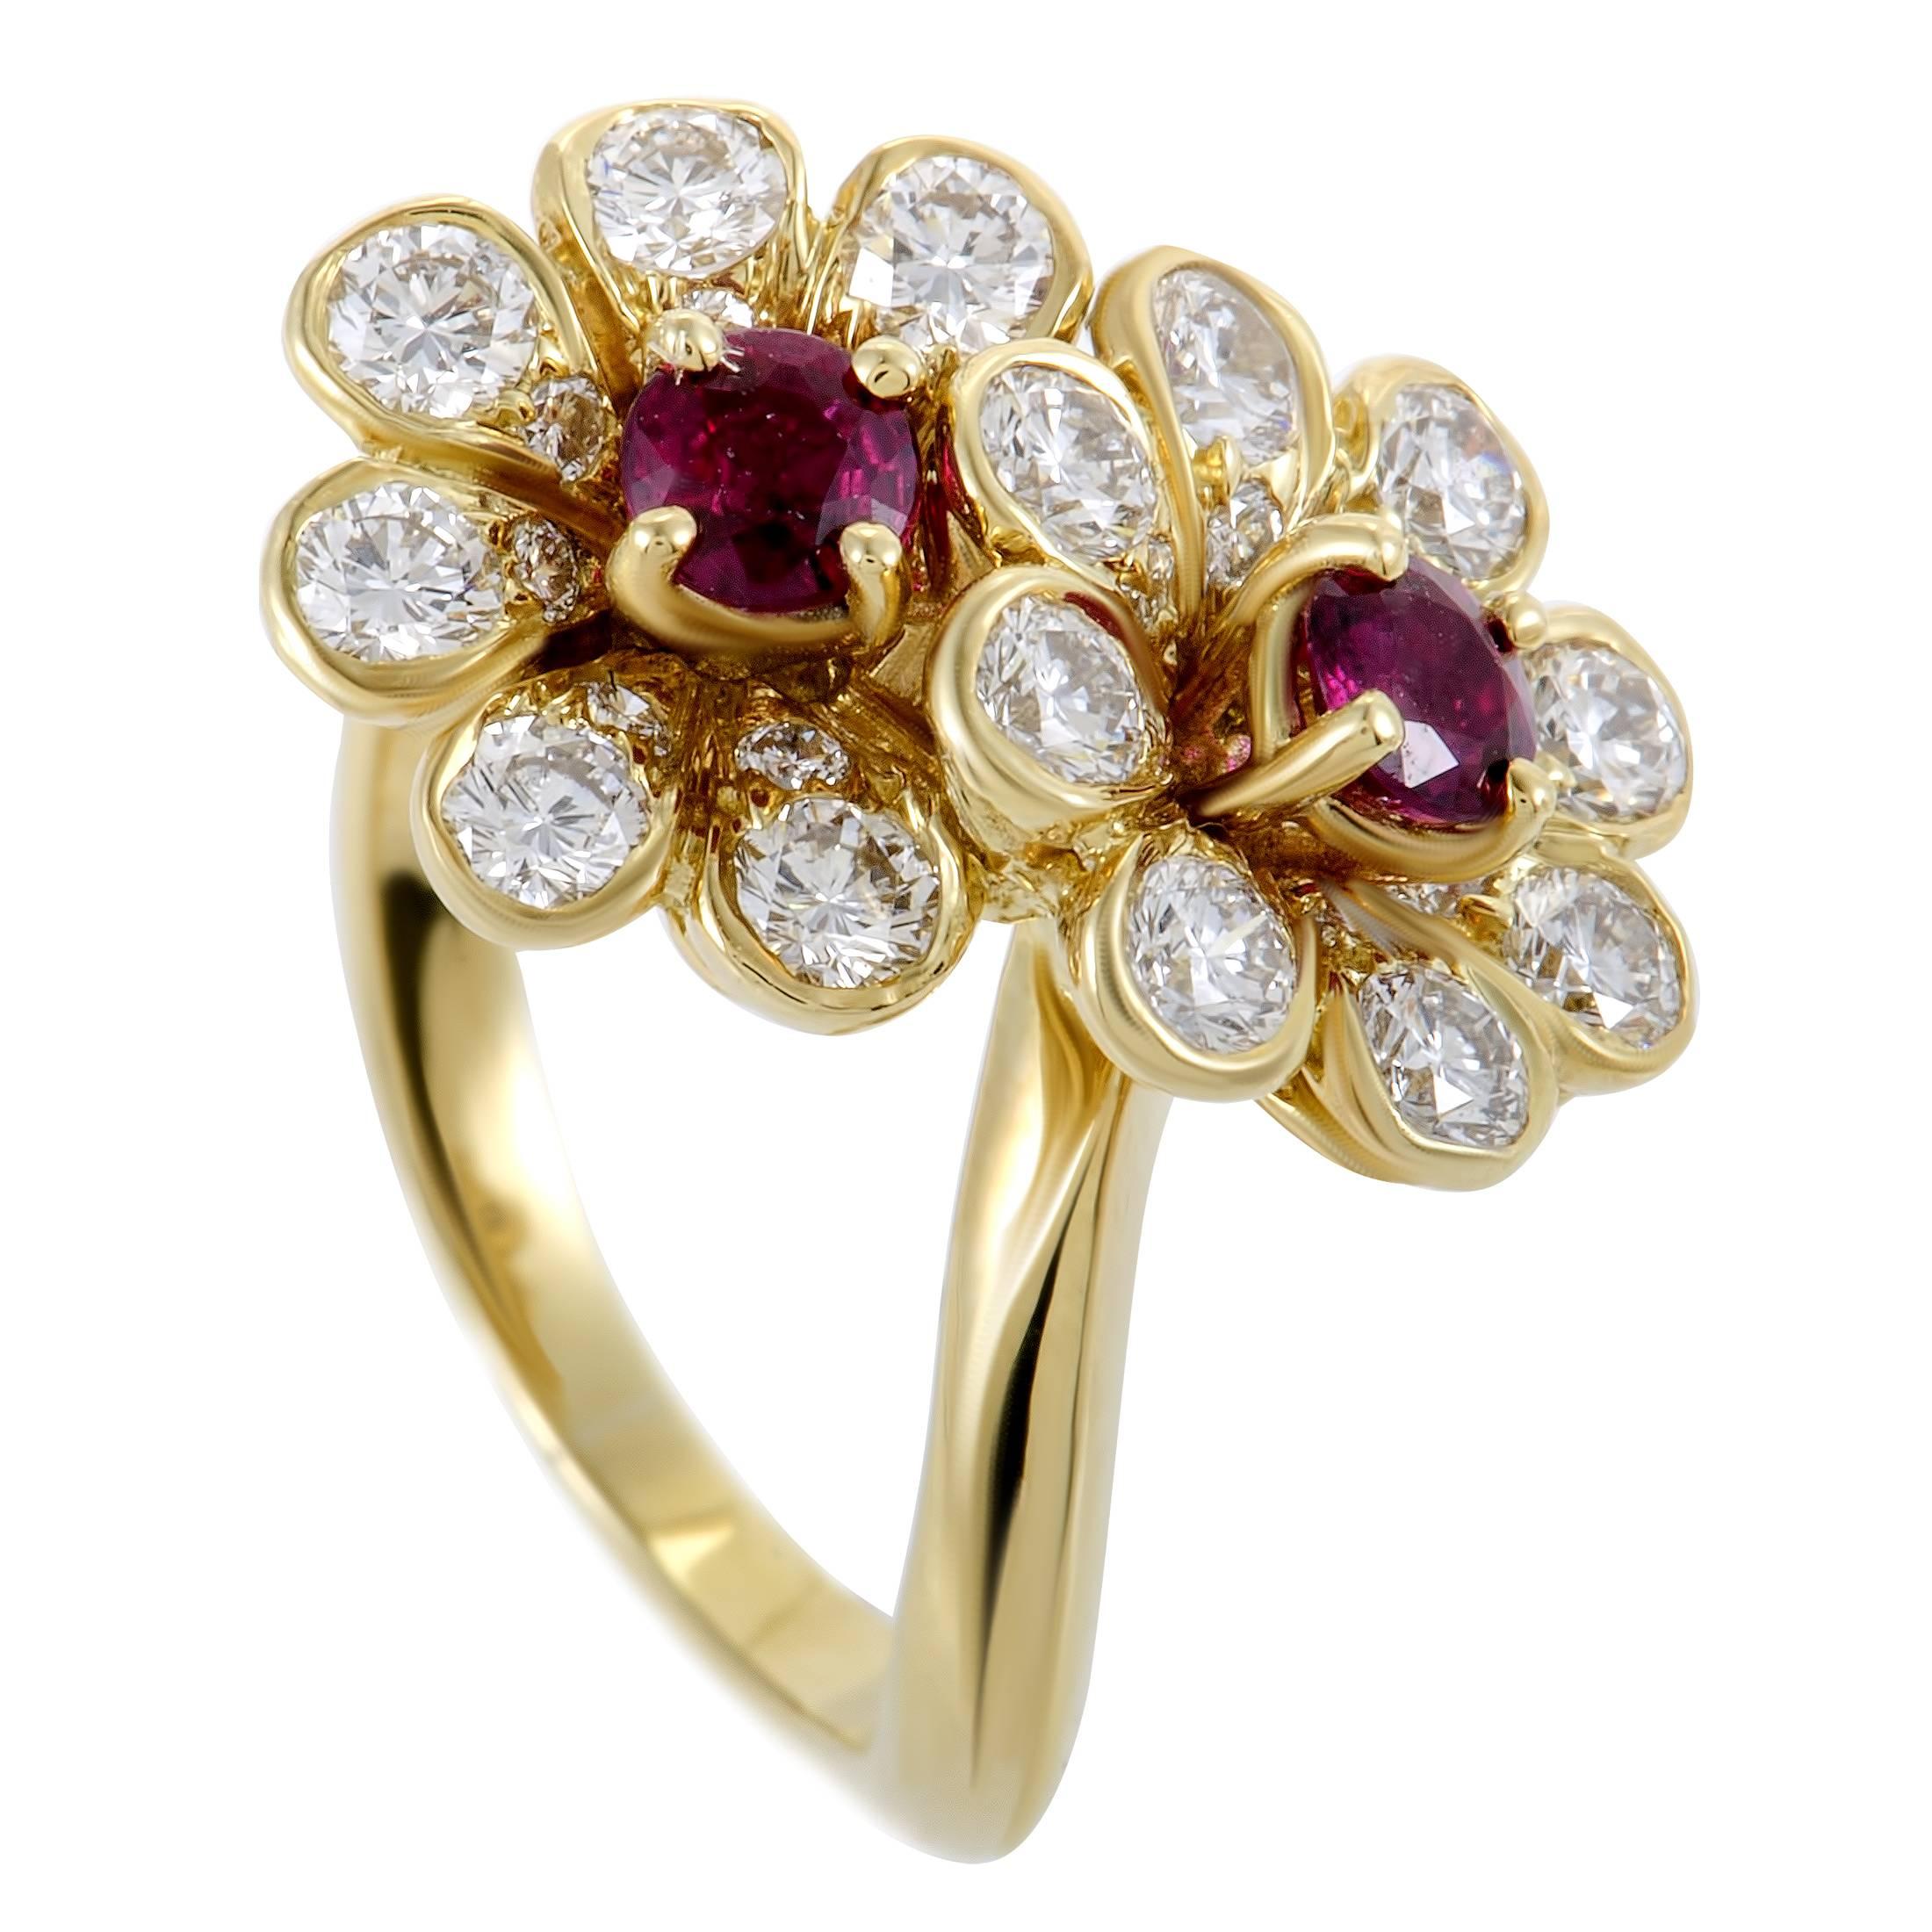 Tiffany & Co. Diamond and Ruby Yellow Gold Flower Ring